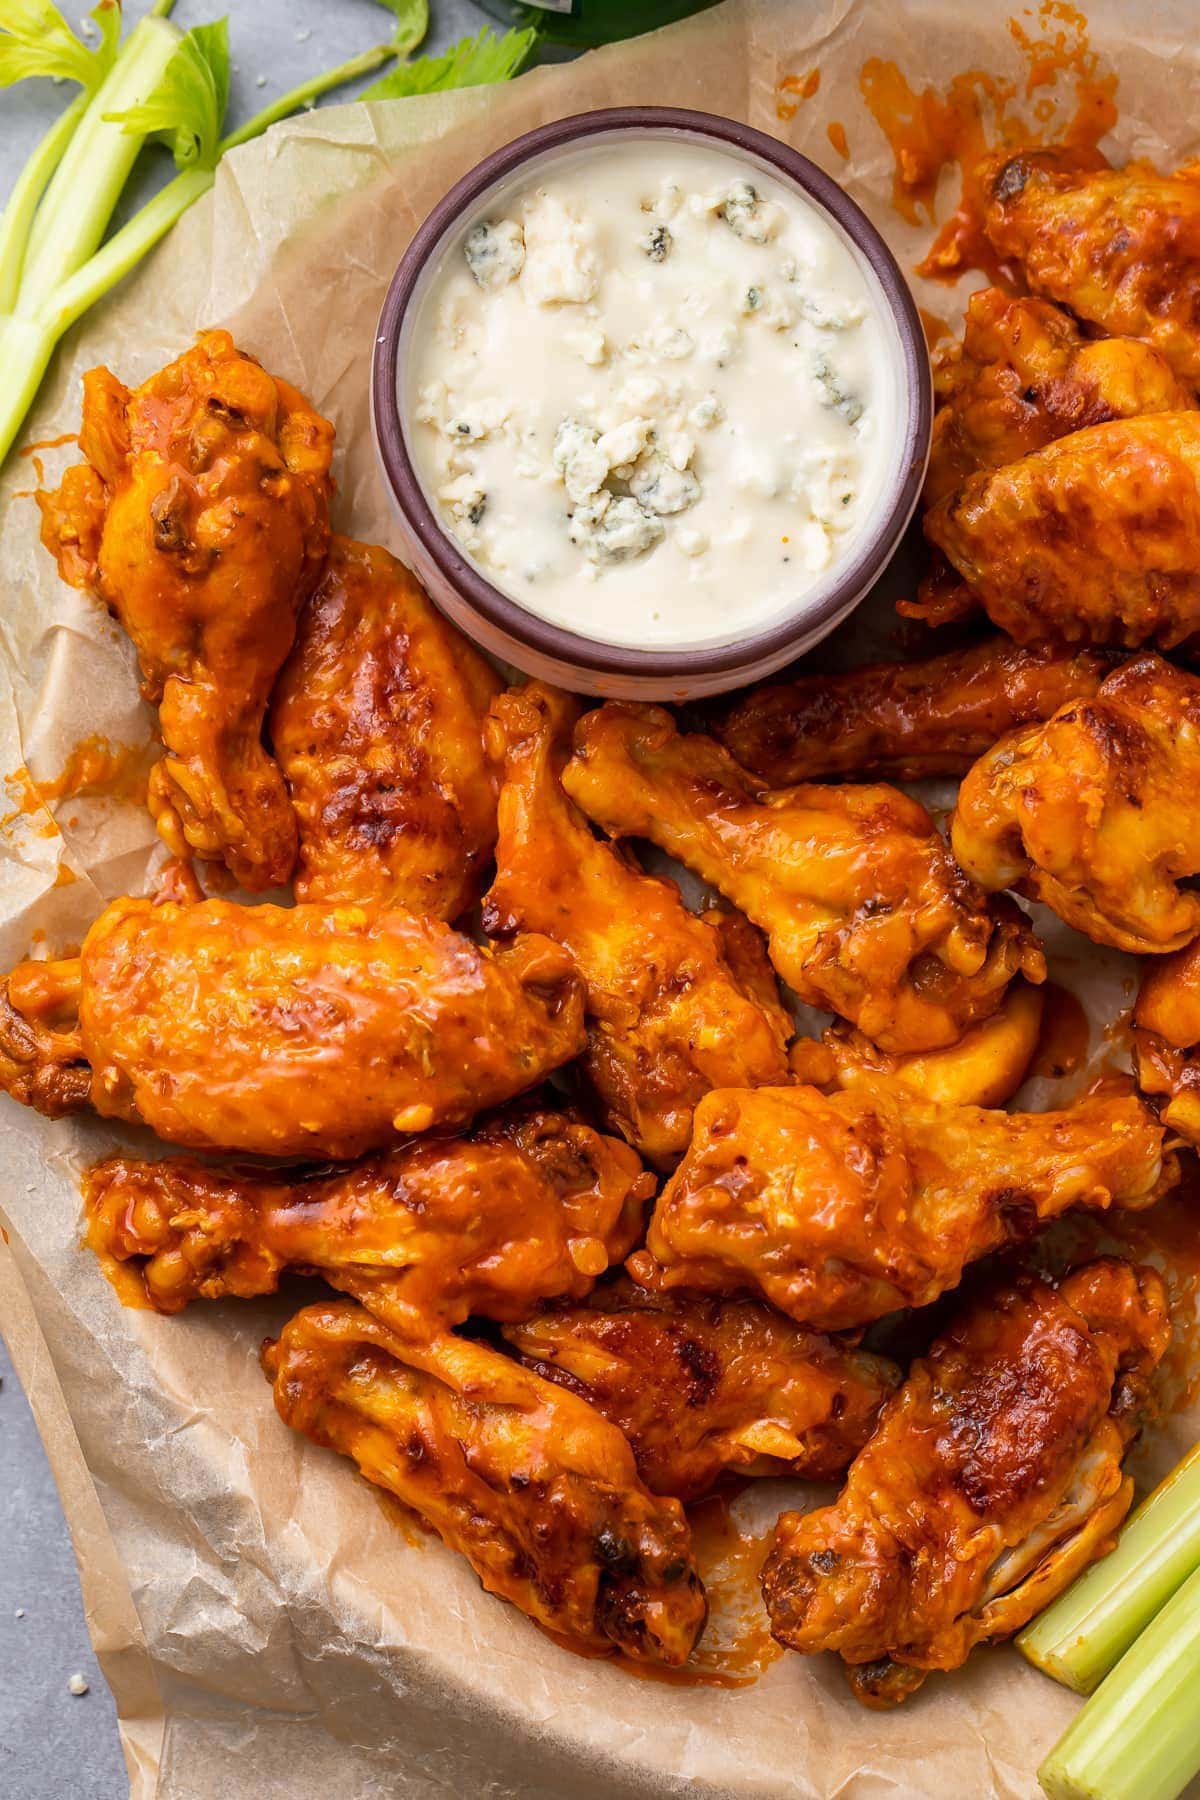 A plate of buffalo orange chicken wings cooked in an Instant Pot and plated with a small ramekin of ranch dressing.